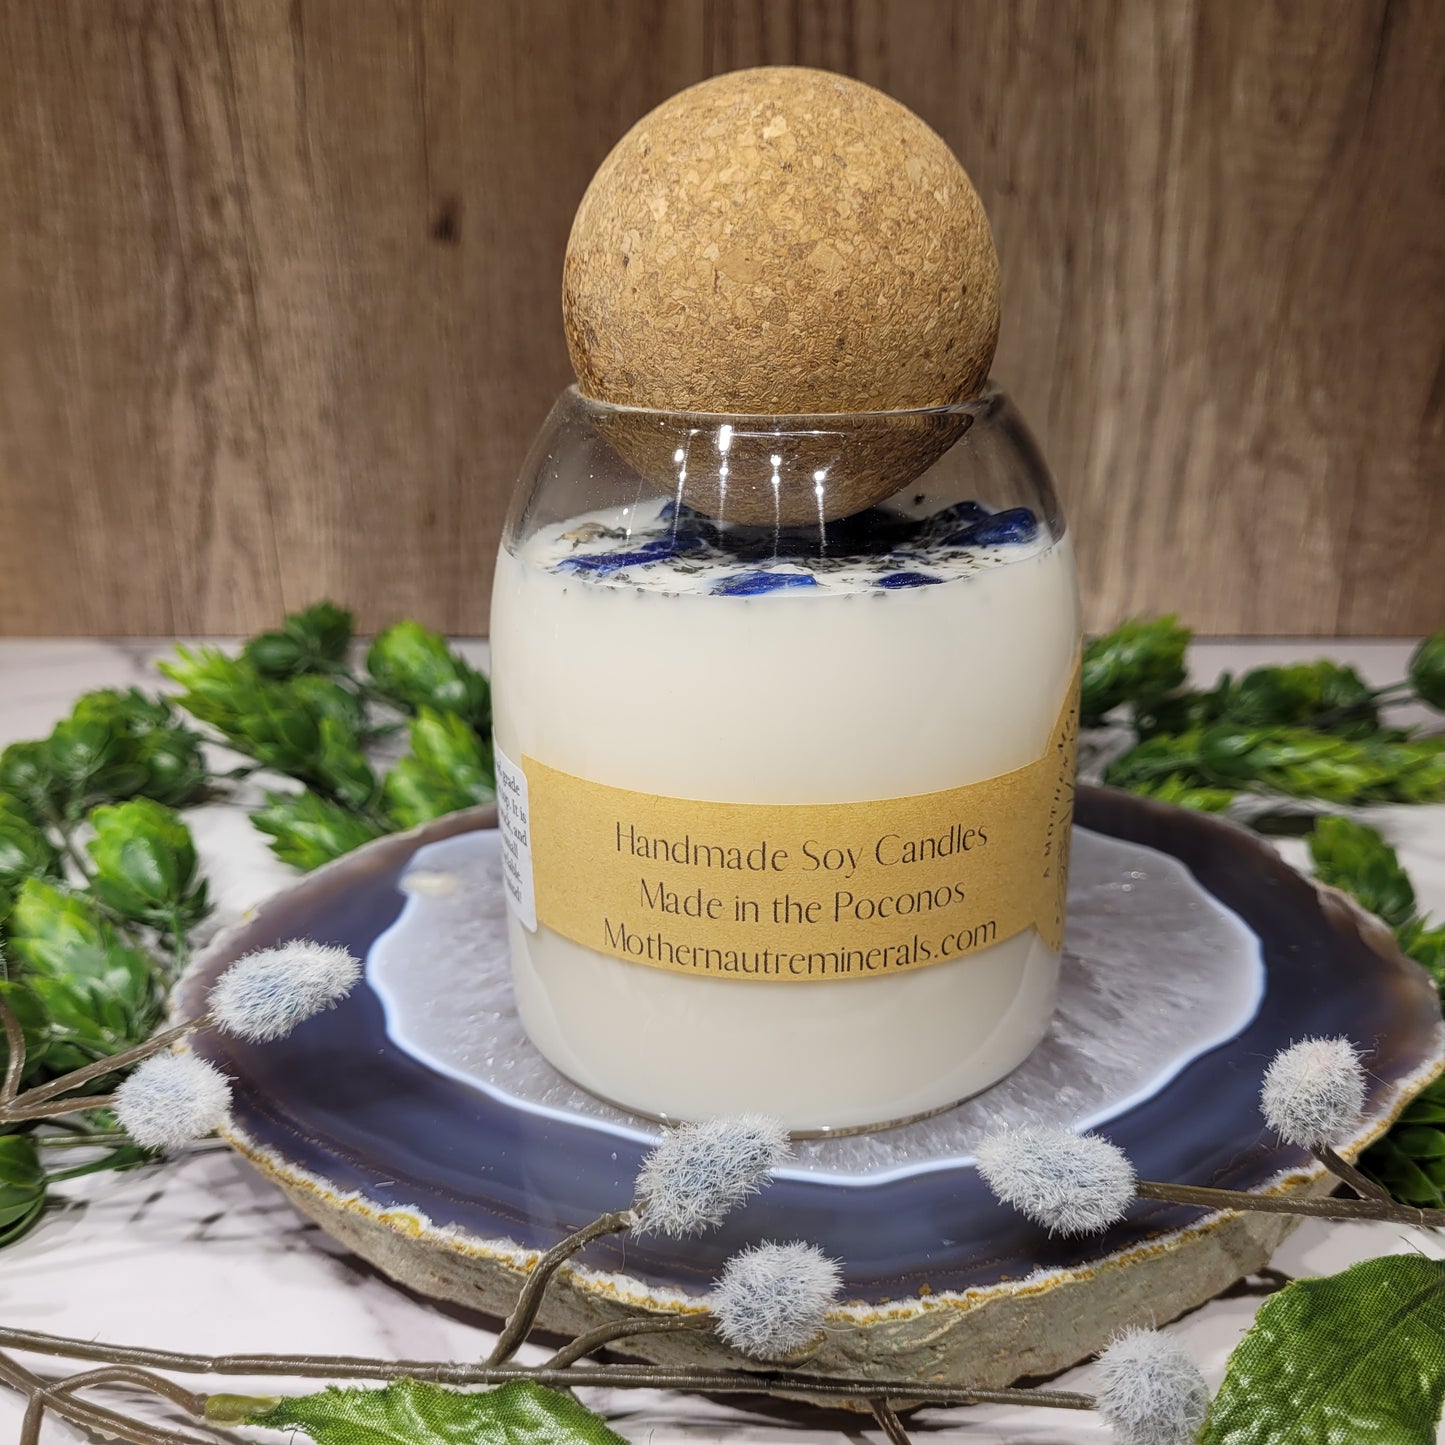 Garden Mint Soy Candle